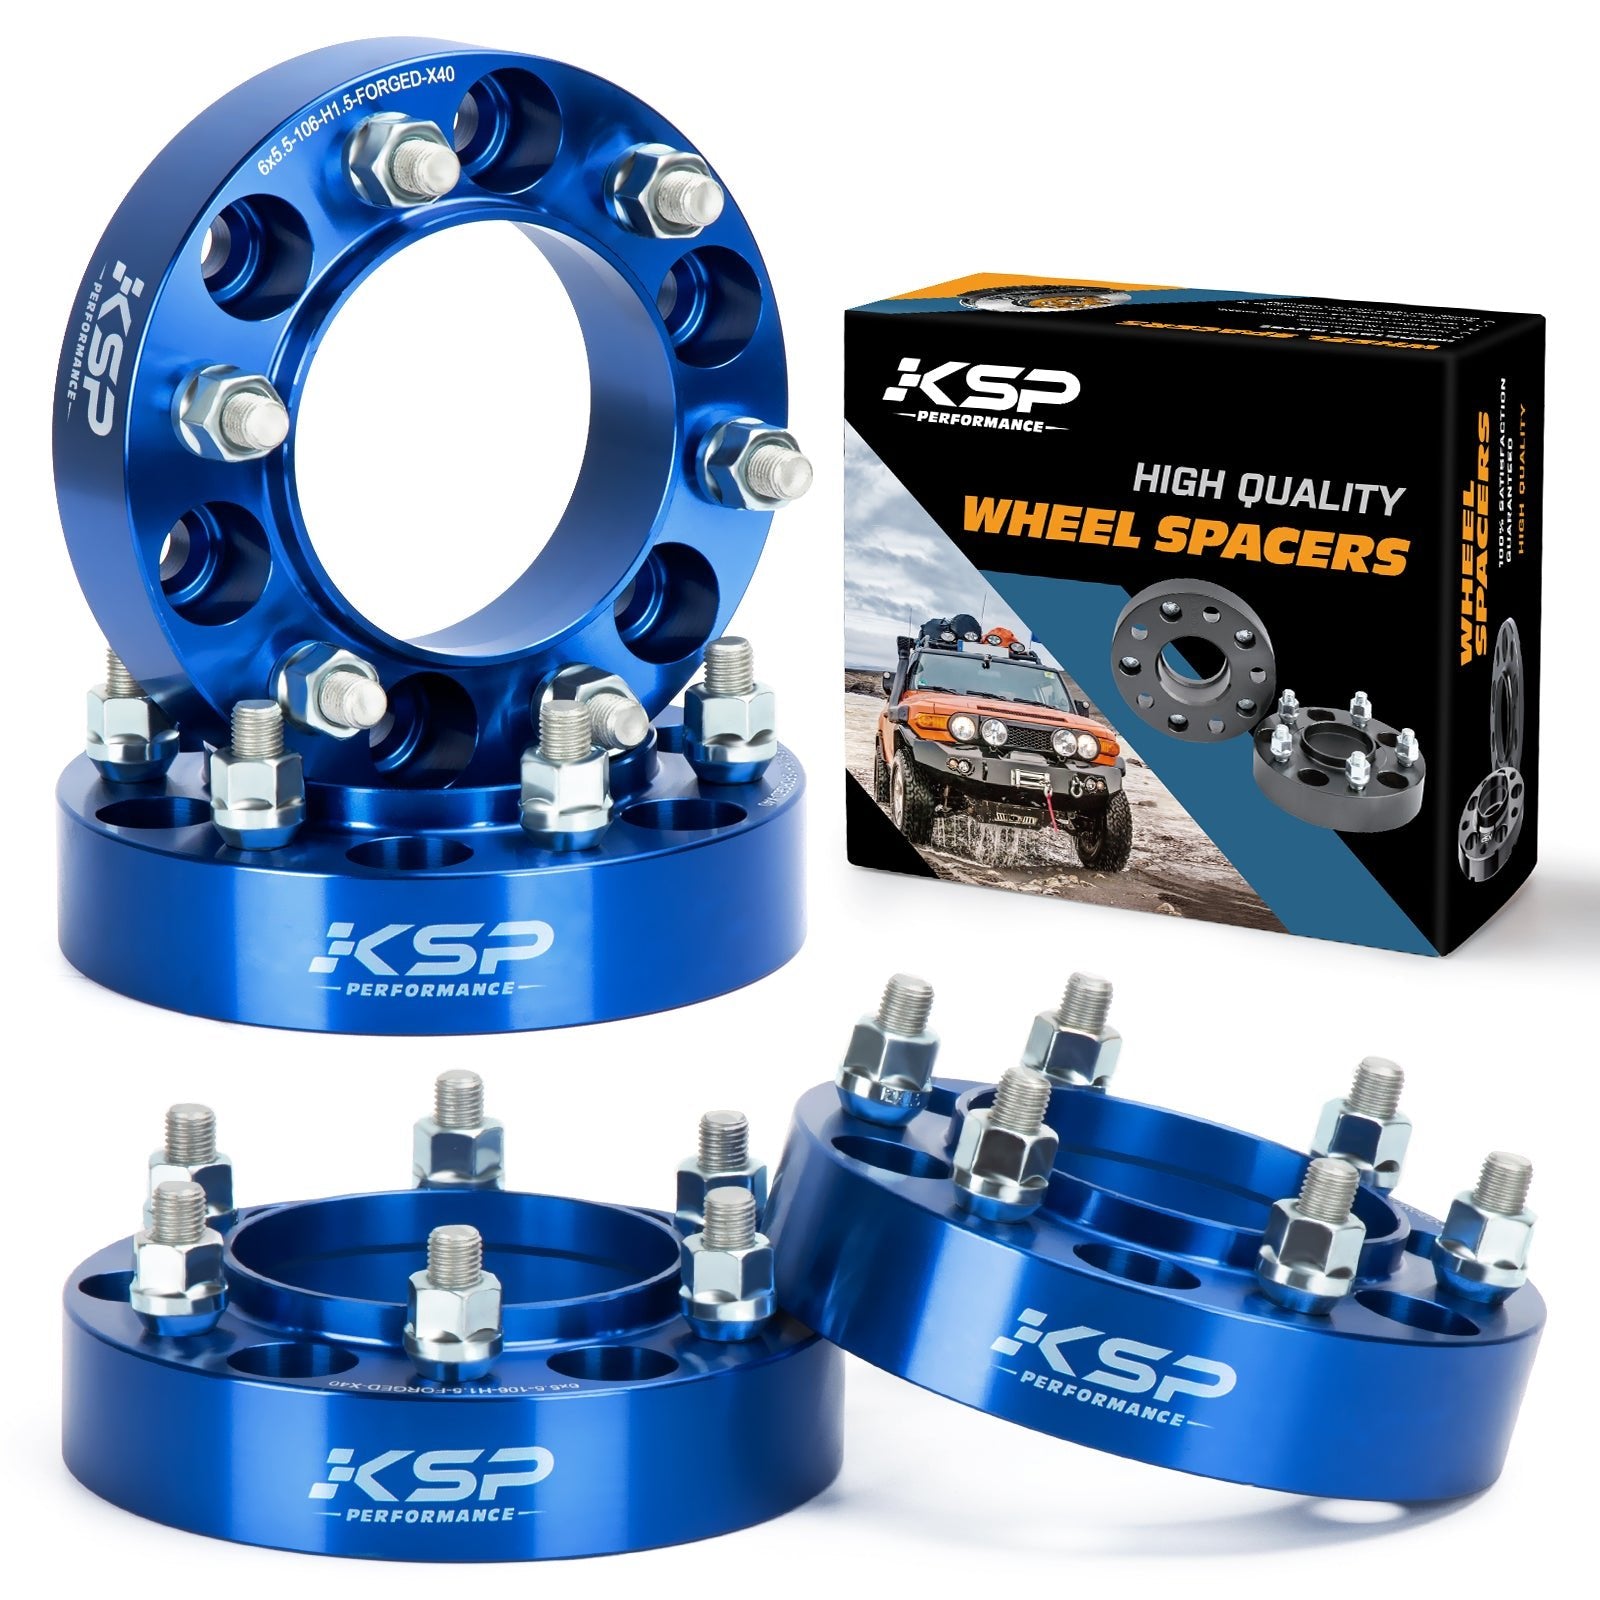 Wheel Spacers 1.5 inch 6x5.5" Hubcentric Forged For Toyota Tacoma 4Runner Tundra FJ Cruiser xccscss.